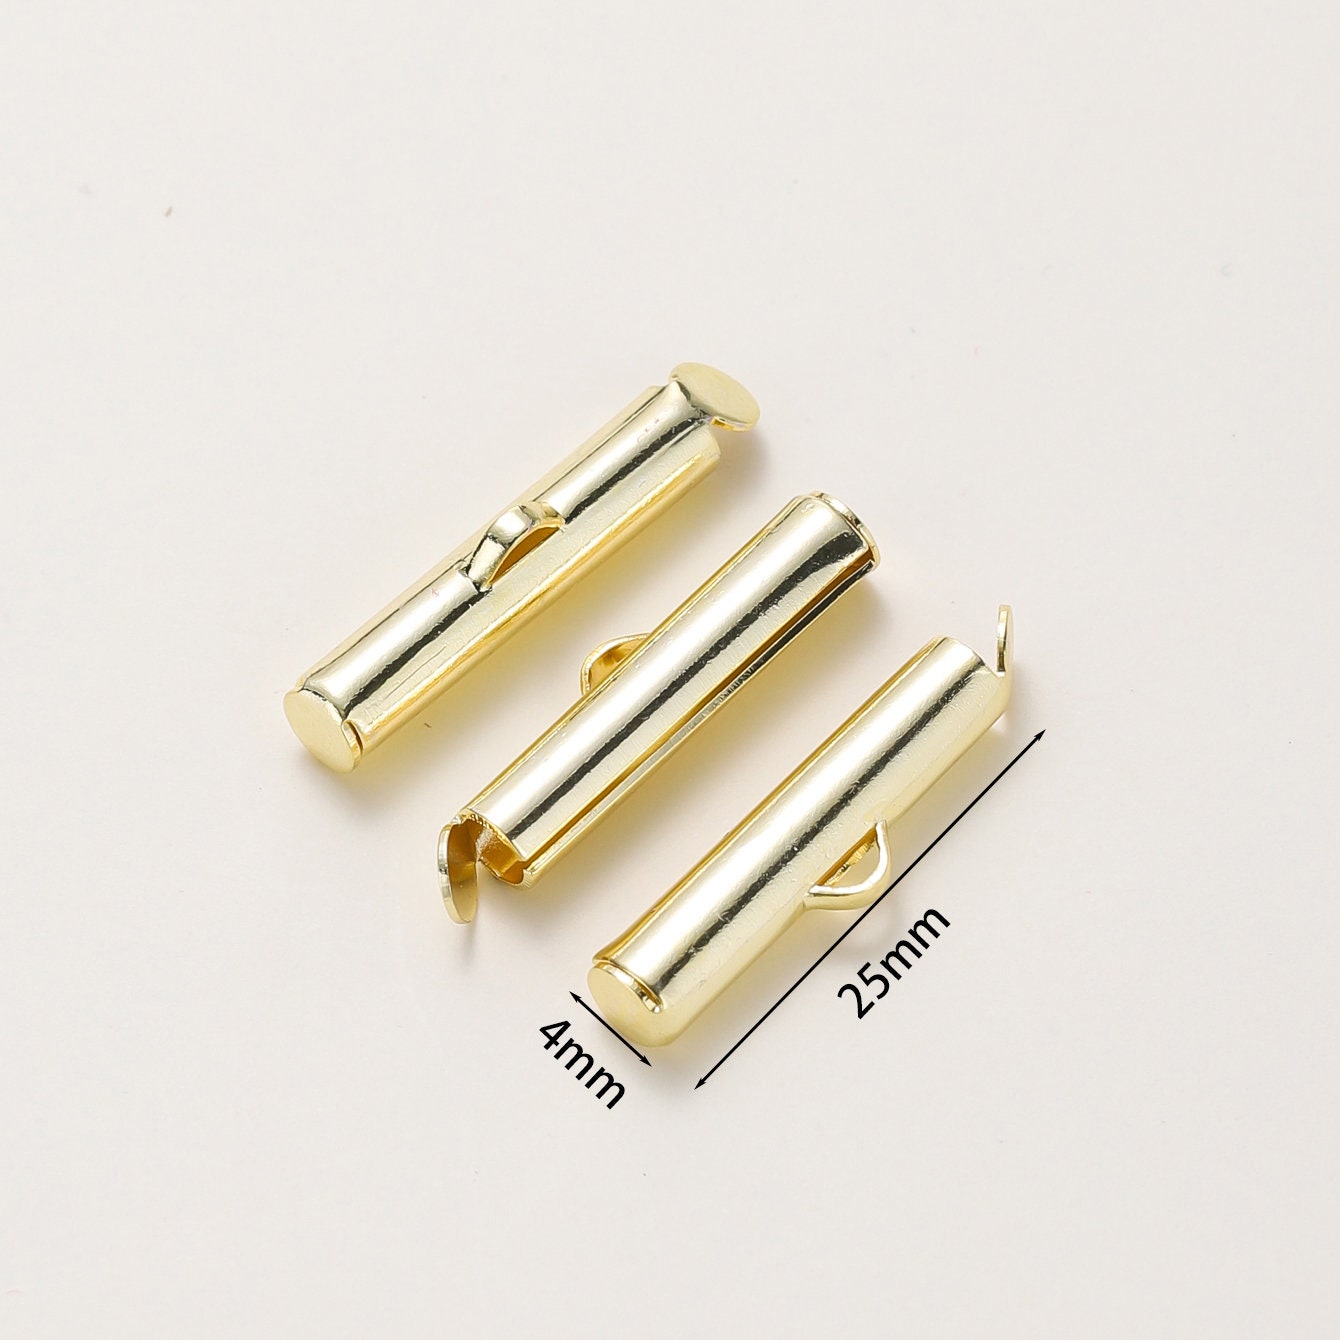 4pcs/lot Transparent Coil Spiral Based Ring Size Adjuster Guard Tightener  Reducer Resizing Tools Findings Jewelry Parts Supplies 